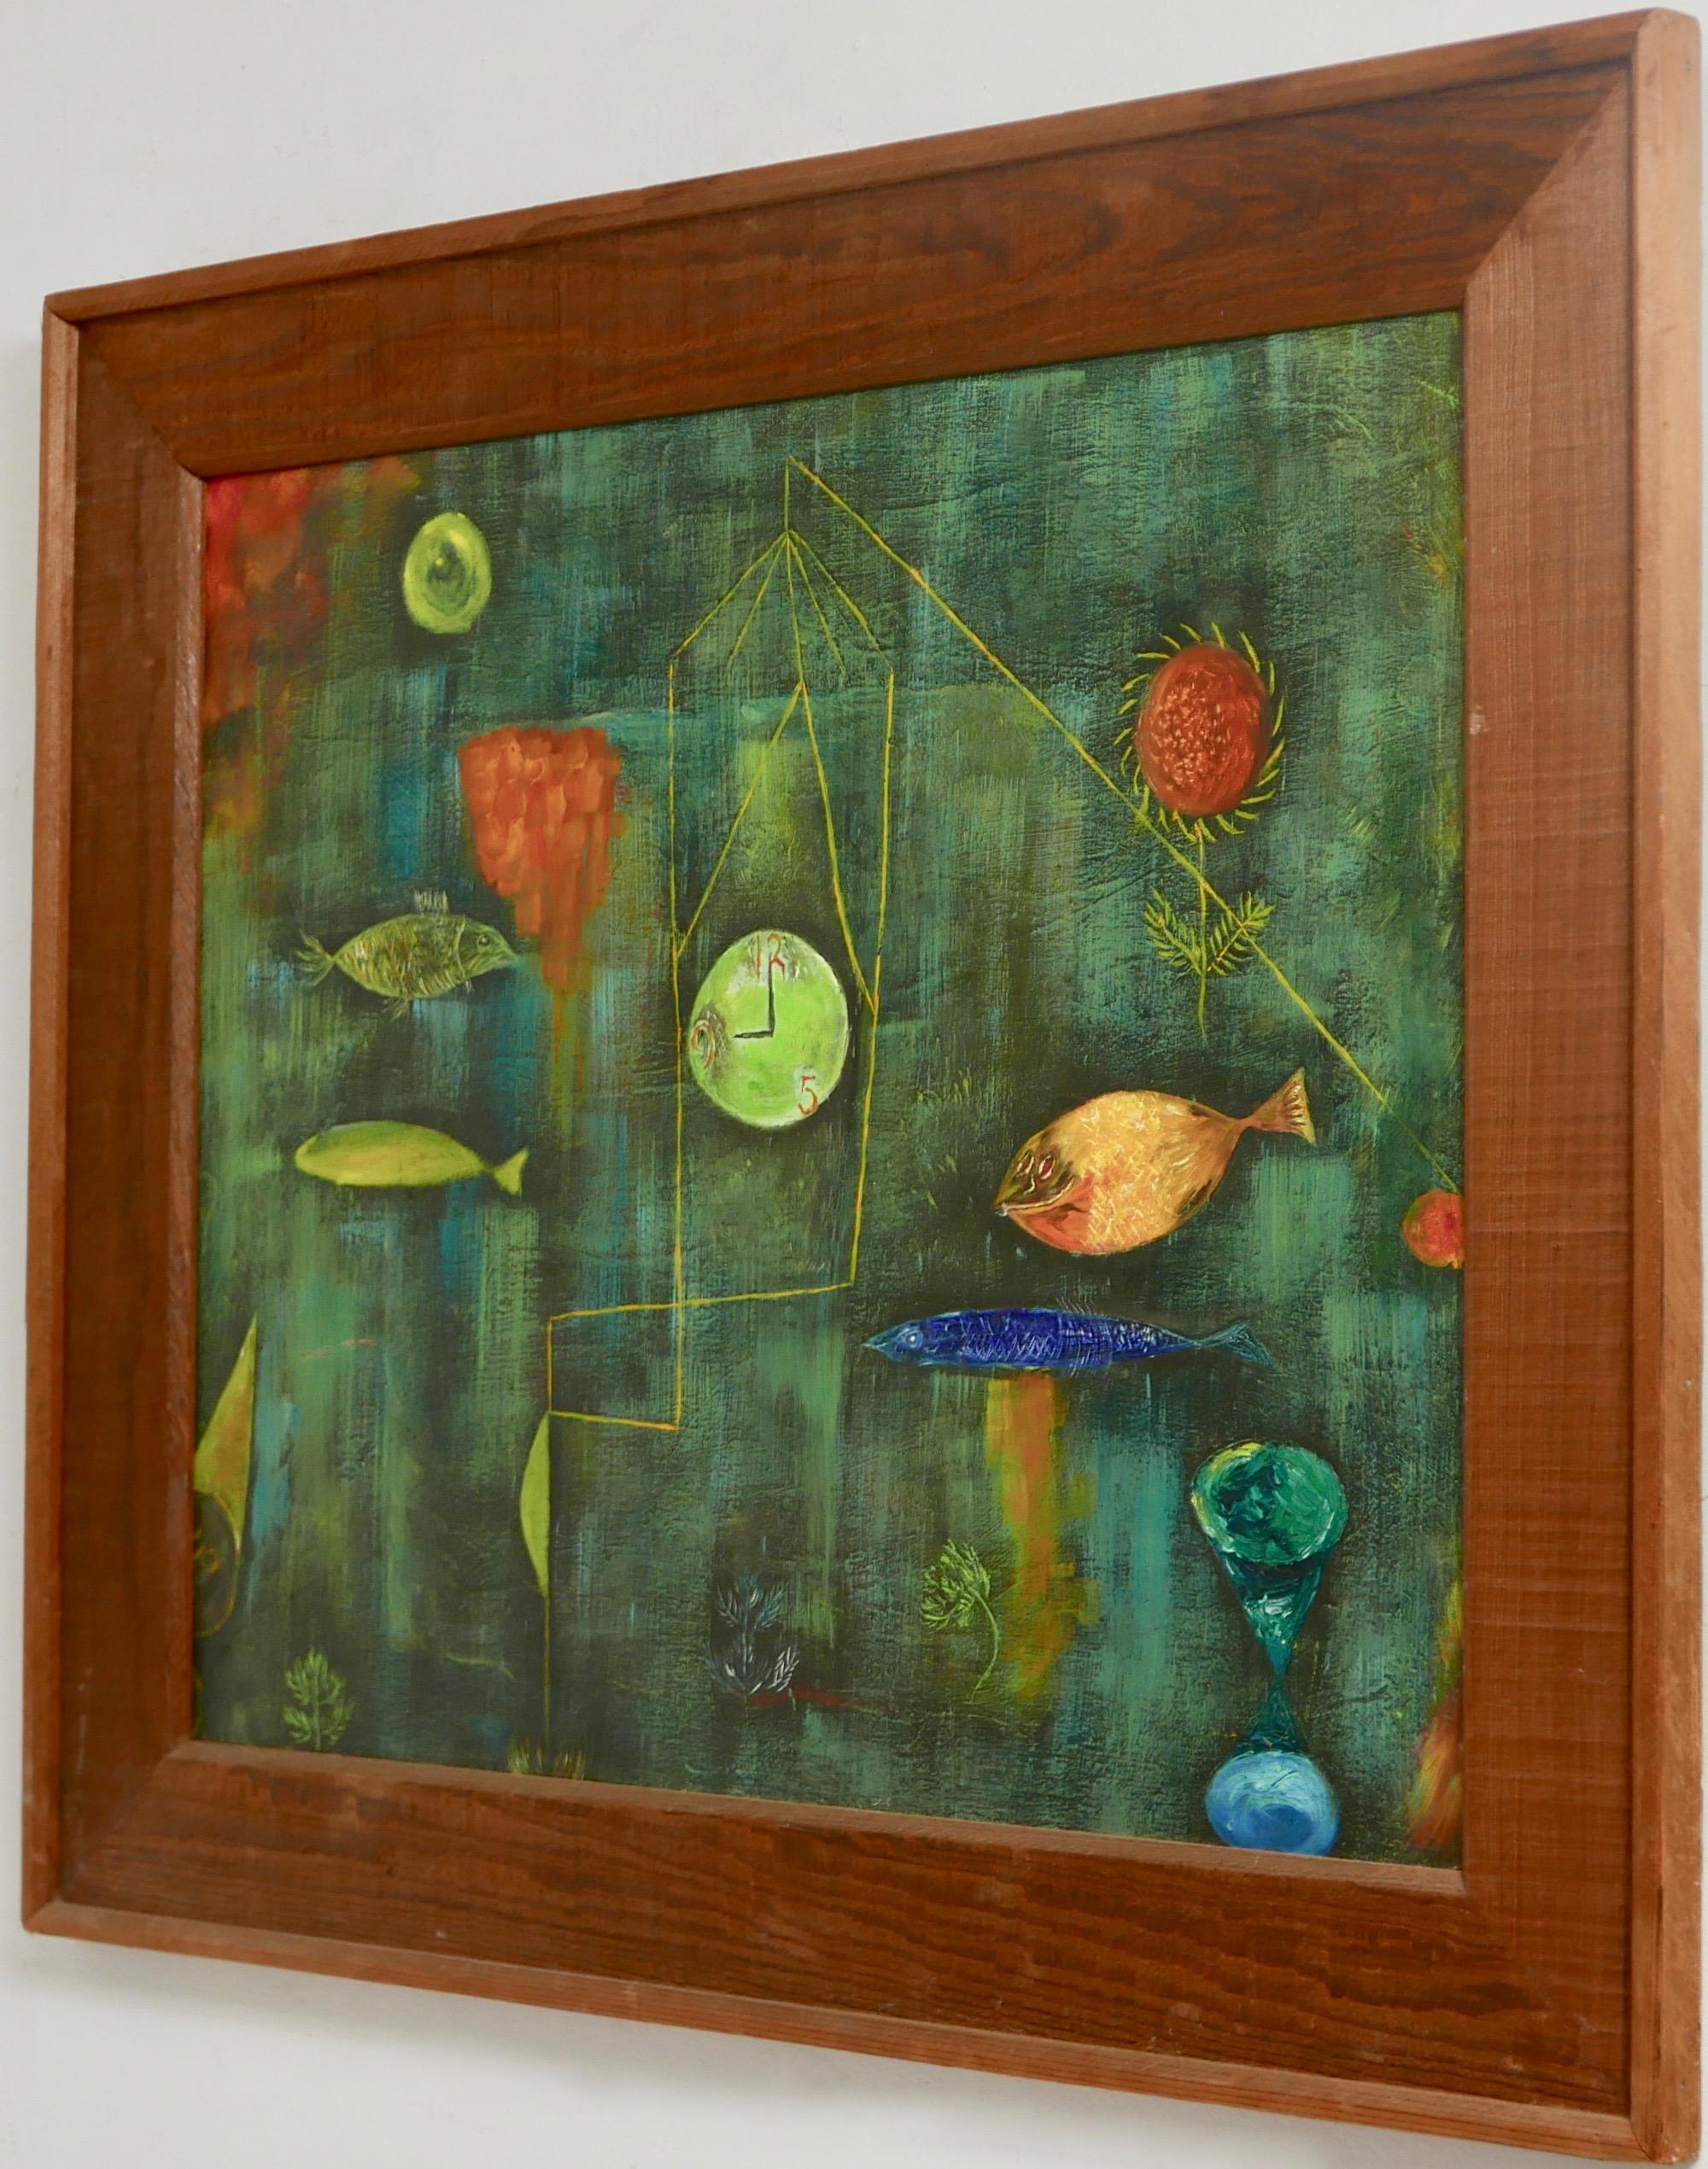  American Dreamlike Surrealist / Abstract Underwater Painting in Rustic Frame In Good Condition For Sale In San Francisco, CA